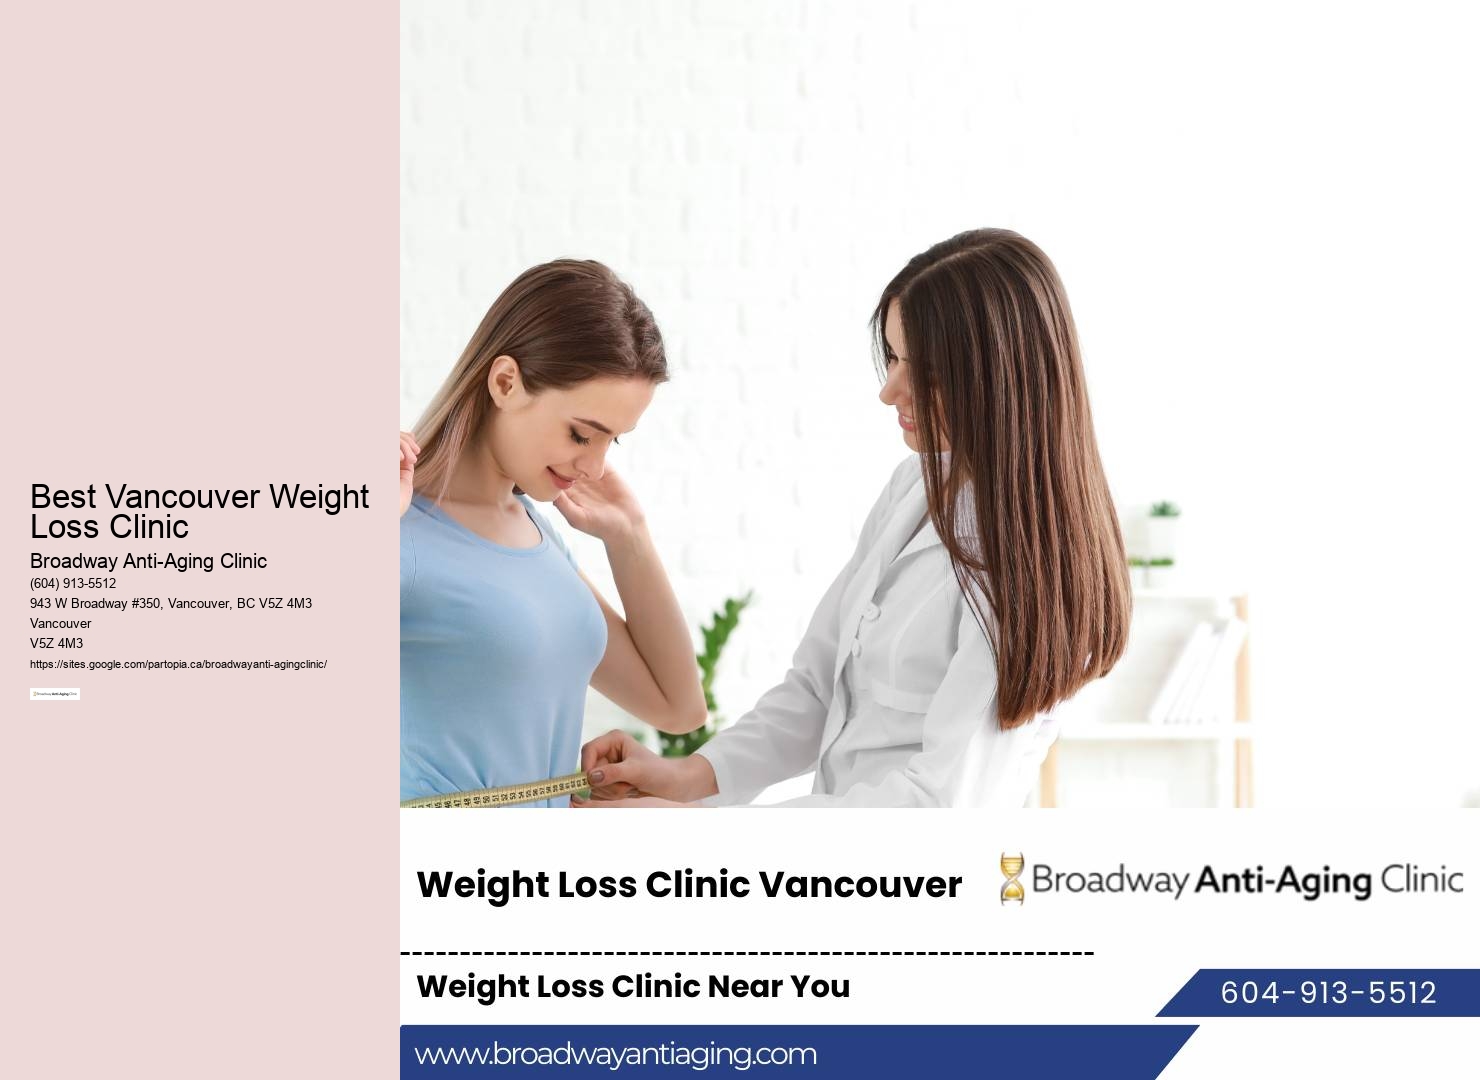 Best Vancouver Weight Loss Clinic